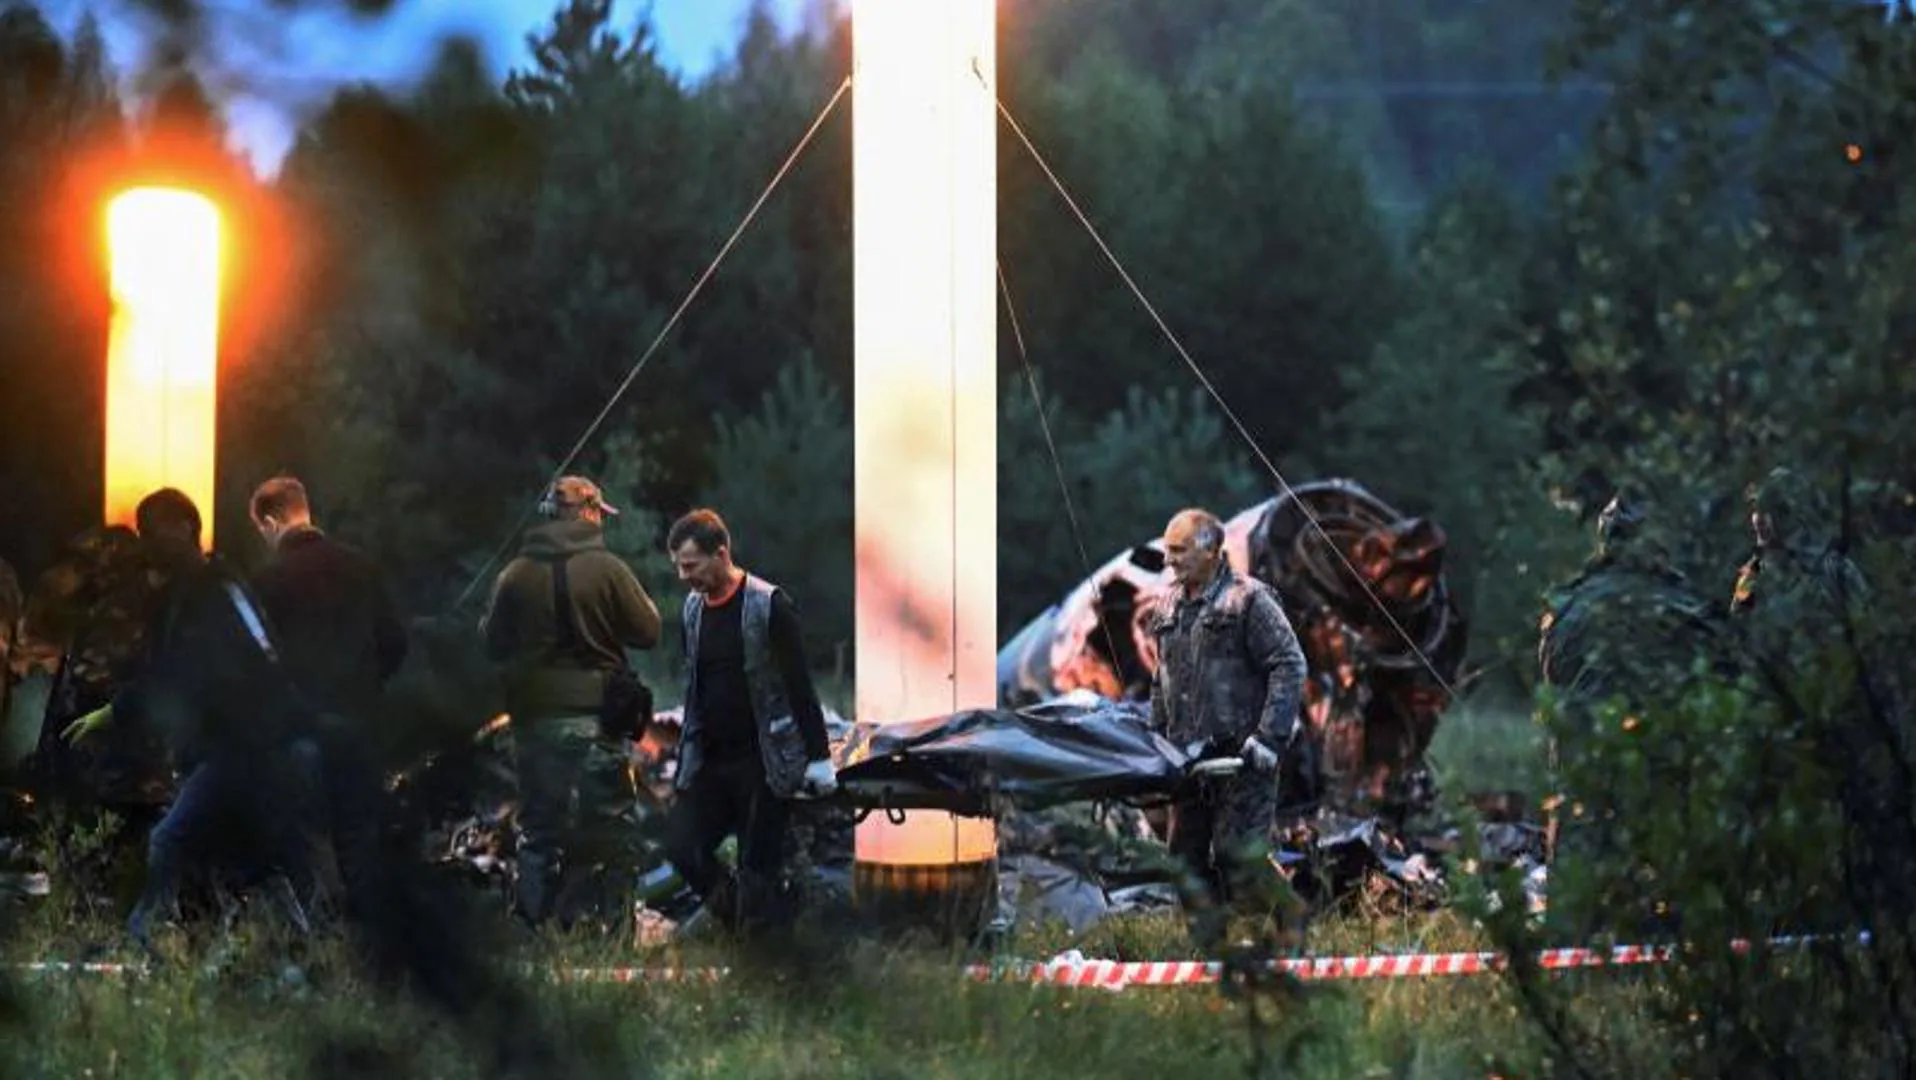 Western intelligence attributes the crash of the plane in which Prigozhin died to a bomb